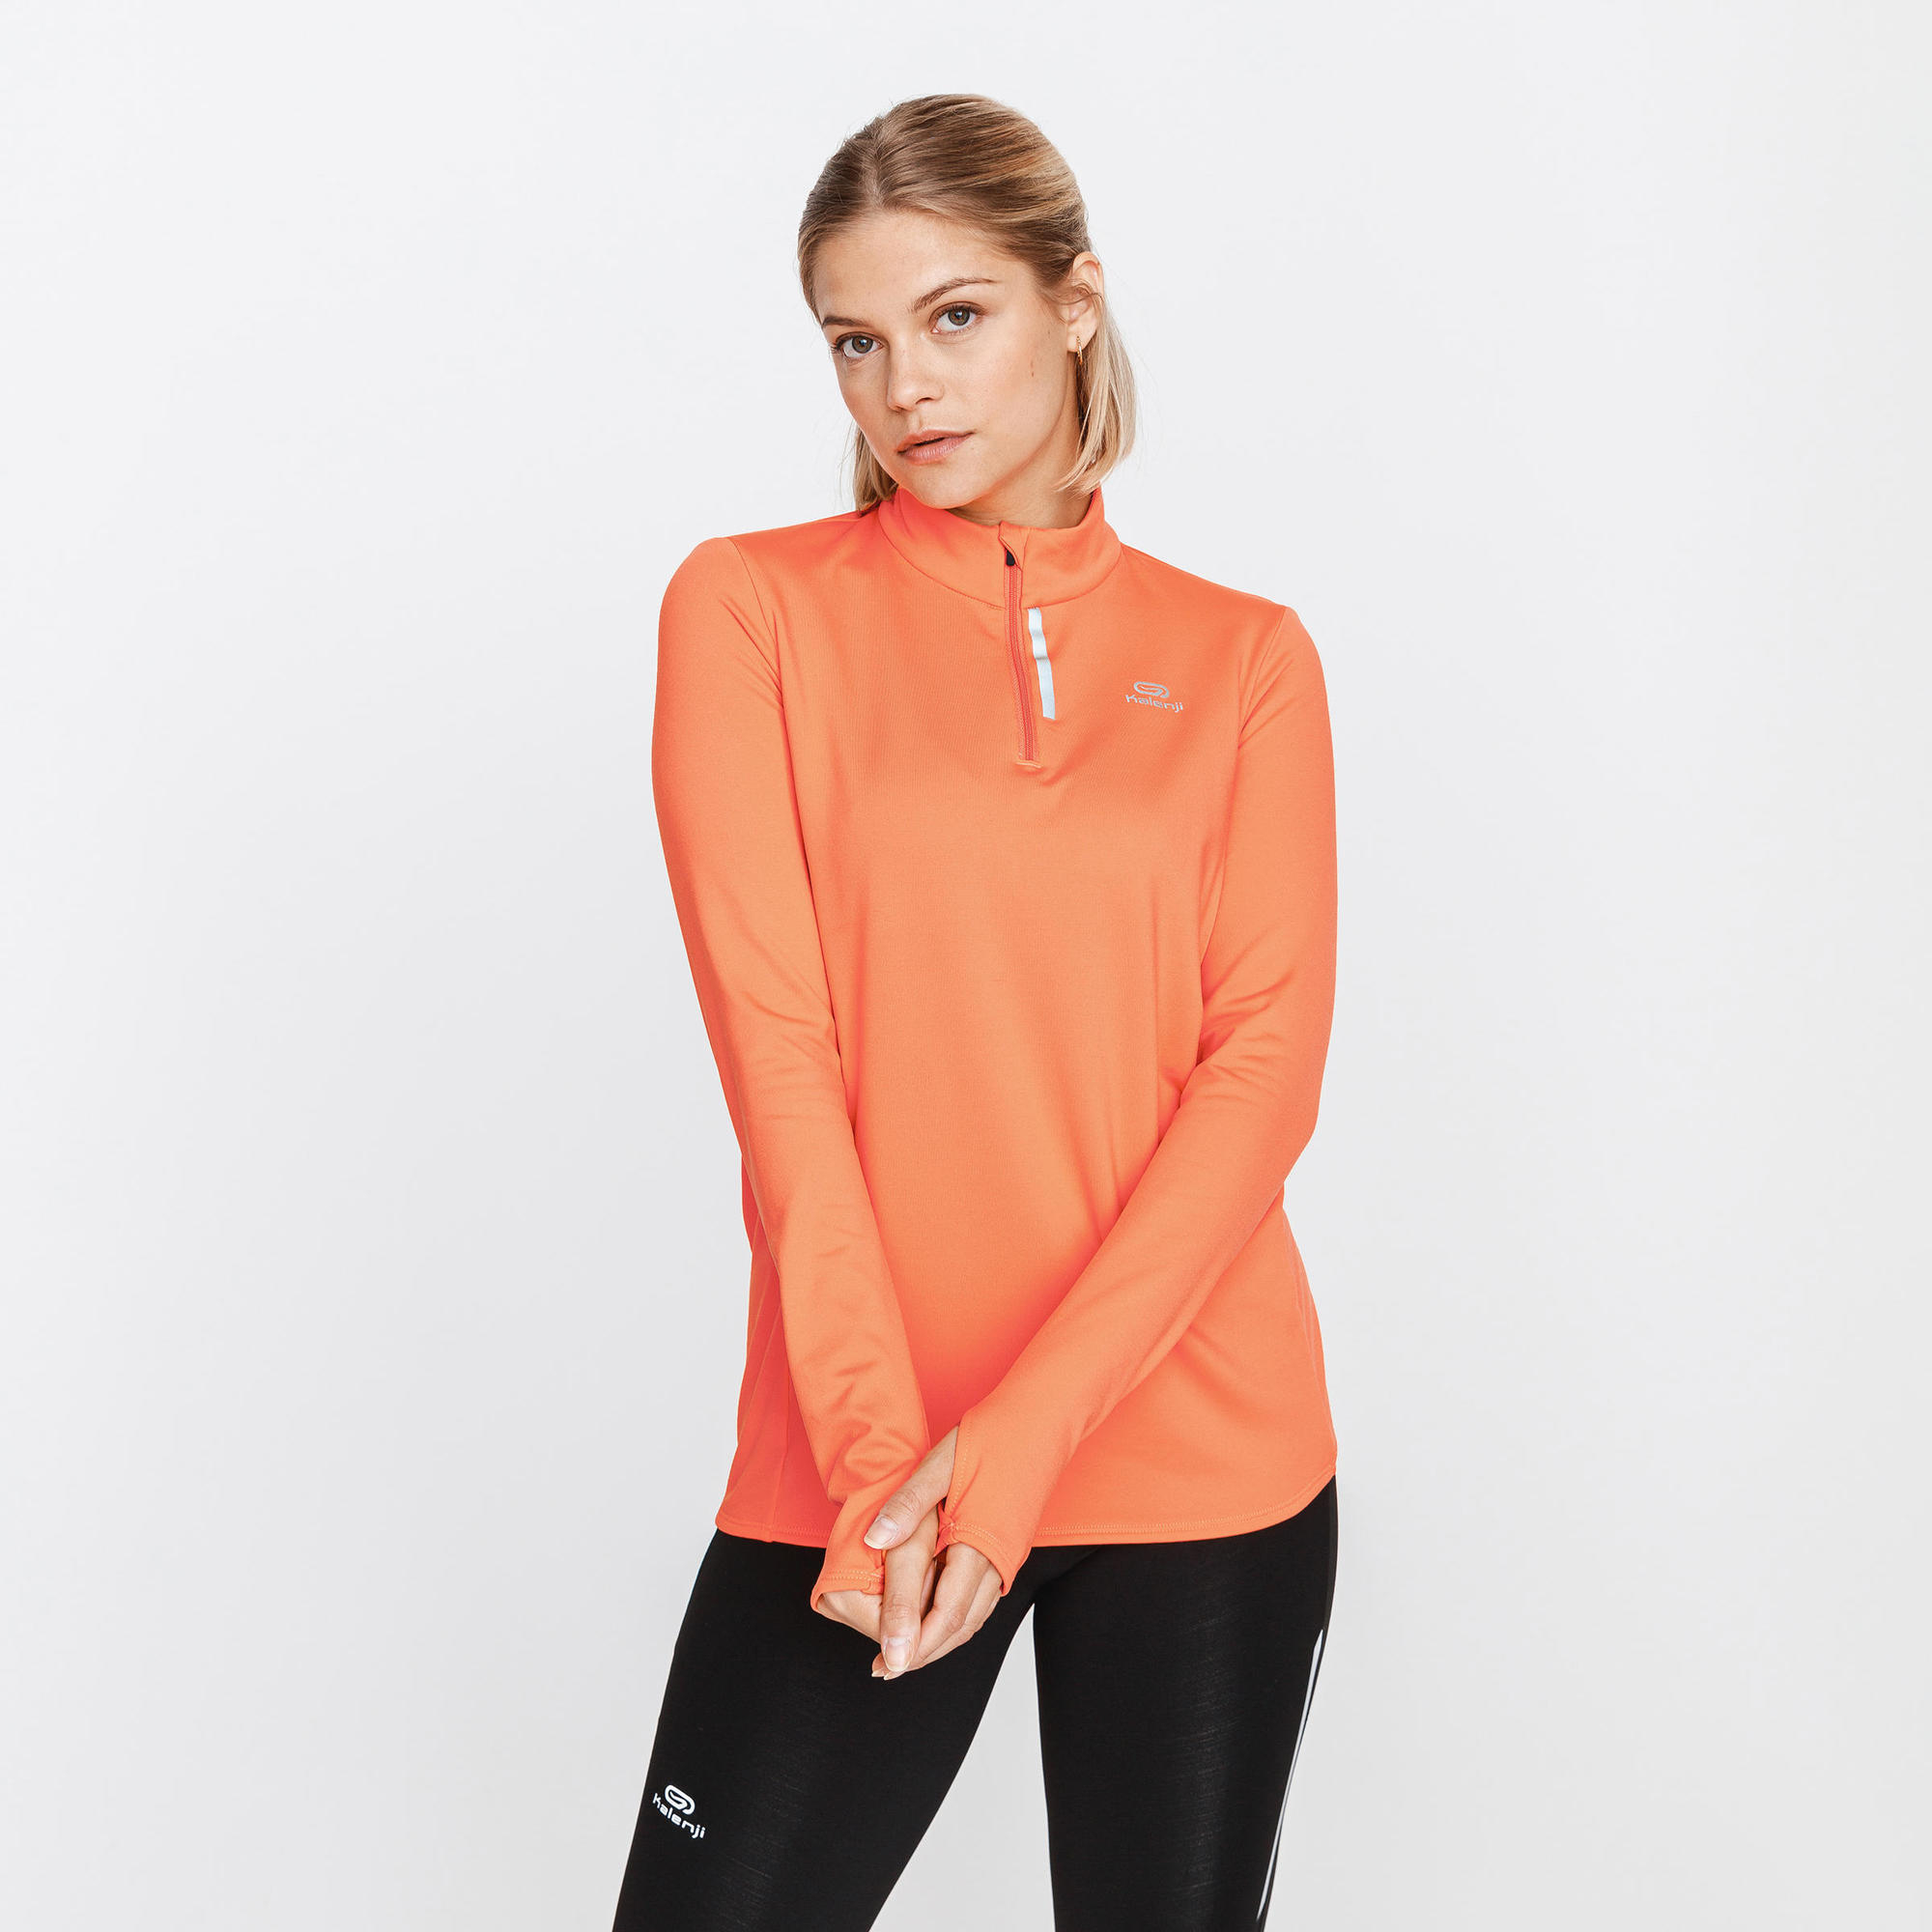 Running Clothes for Women | Road, Trail 